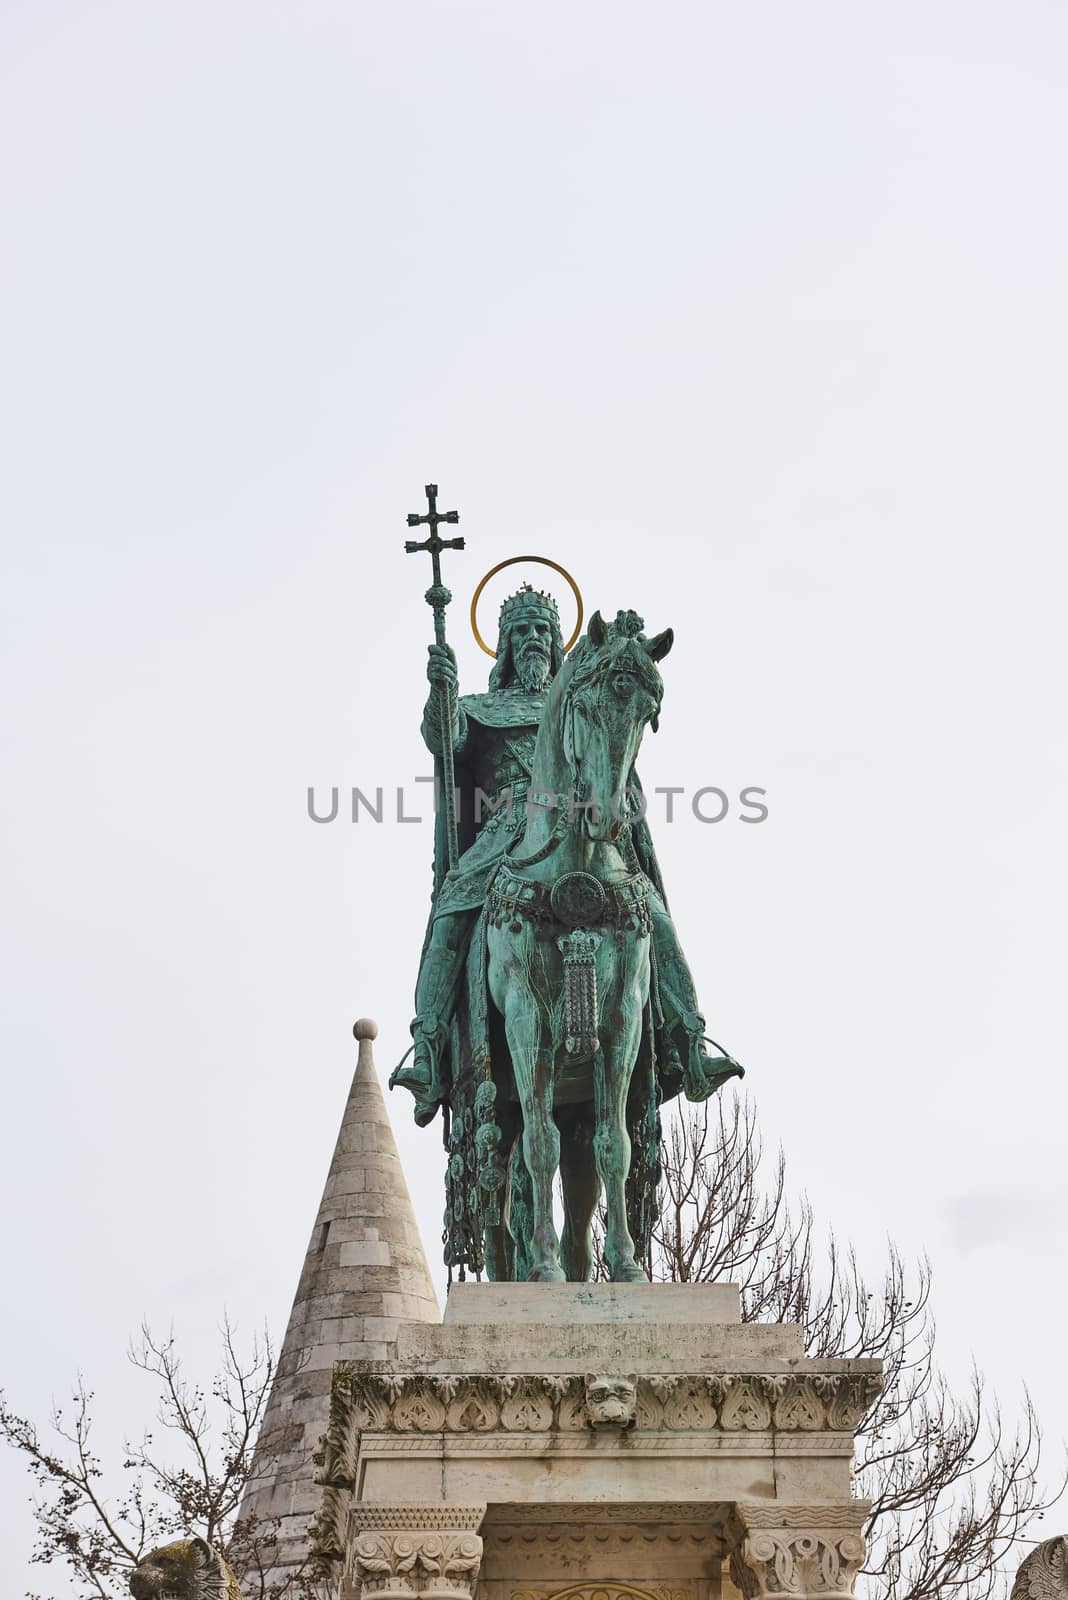 BUDAPEST, HUNGARY - FEBRUARY 02: Bronze statue of Saint Stephen in the Old Town district. February 02, 2016 in Budapest.